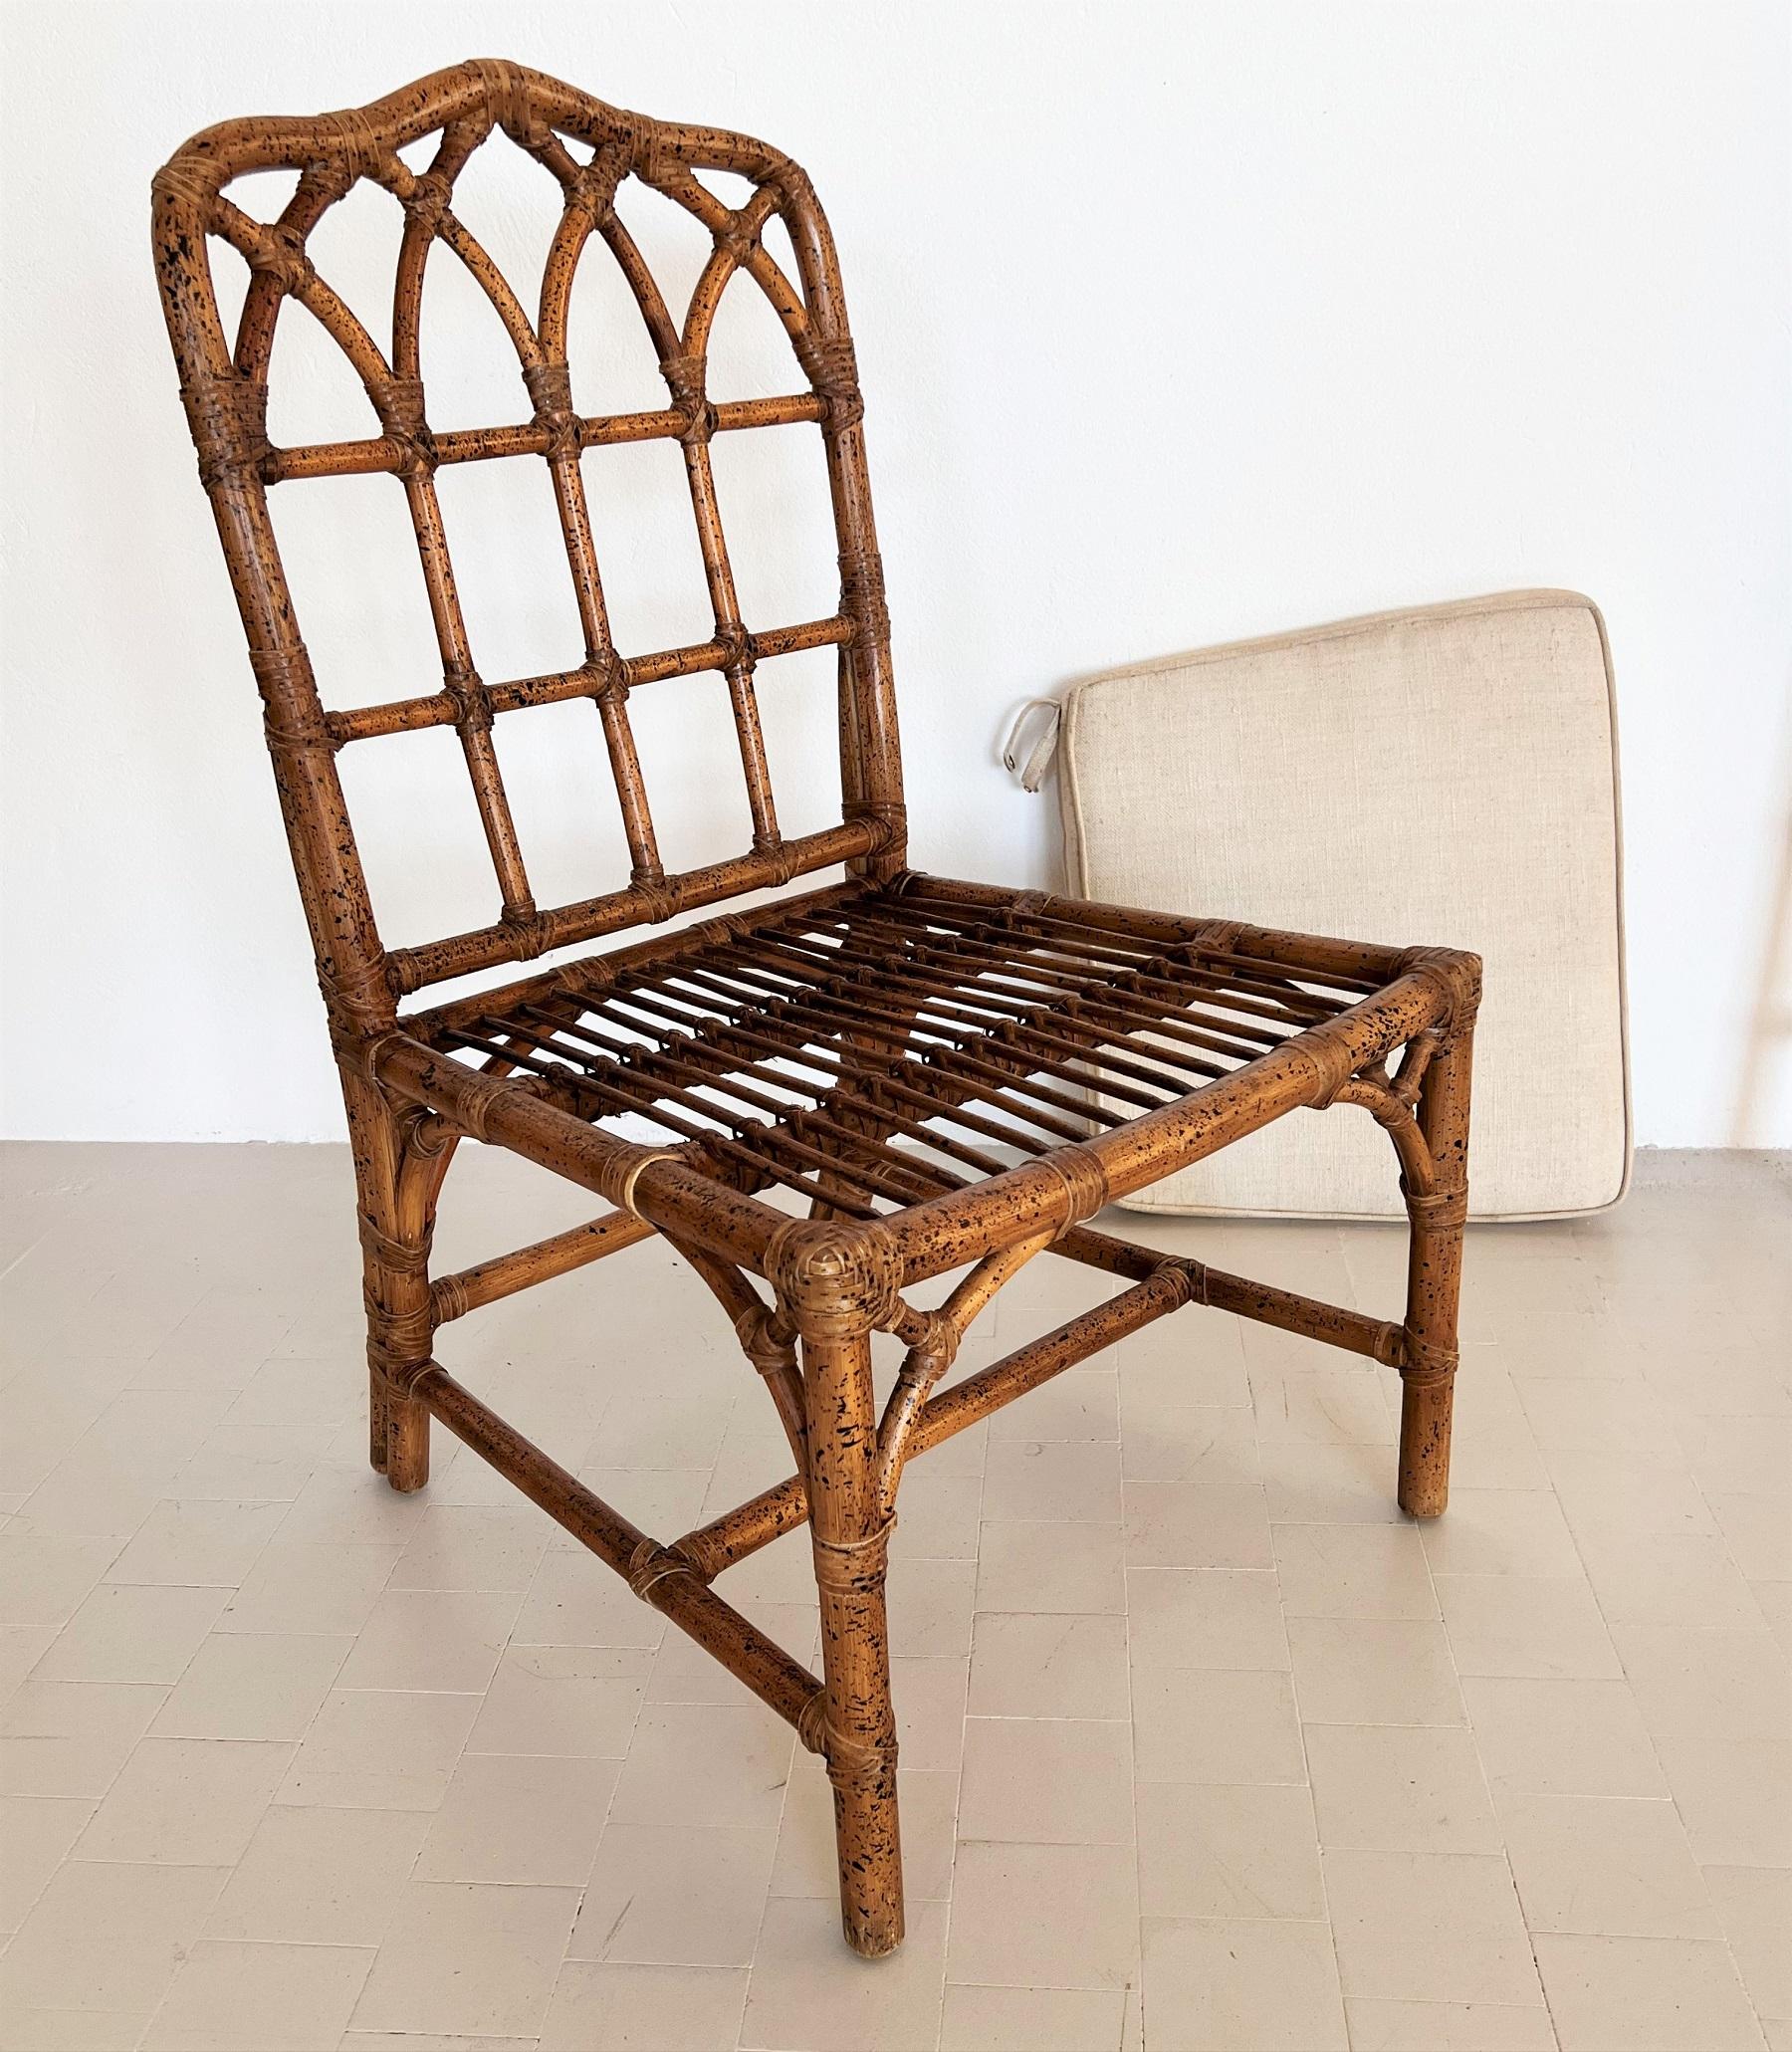 Hand-Crafted Italian Large Mid-Century Bamboo Chair, 1970s For Sale